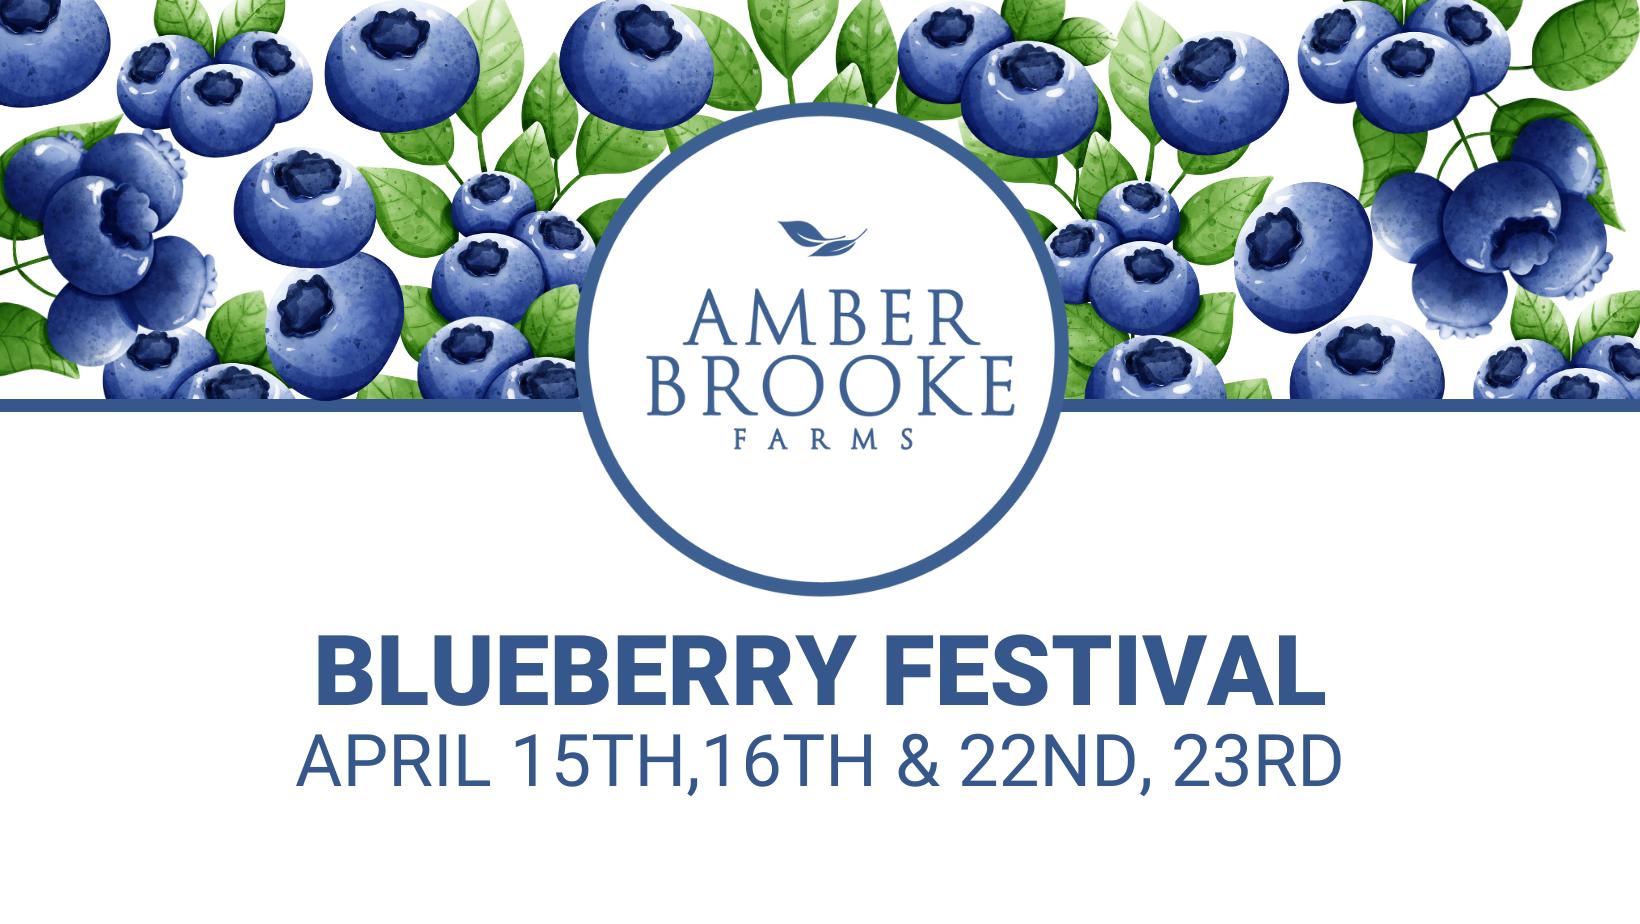 2nd Annual Blueberry Festival at Amber Brooke Farms | Eustis, FL